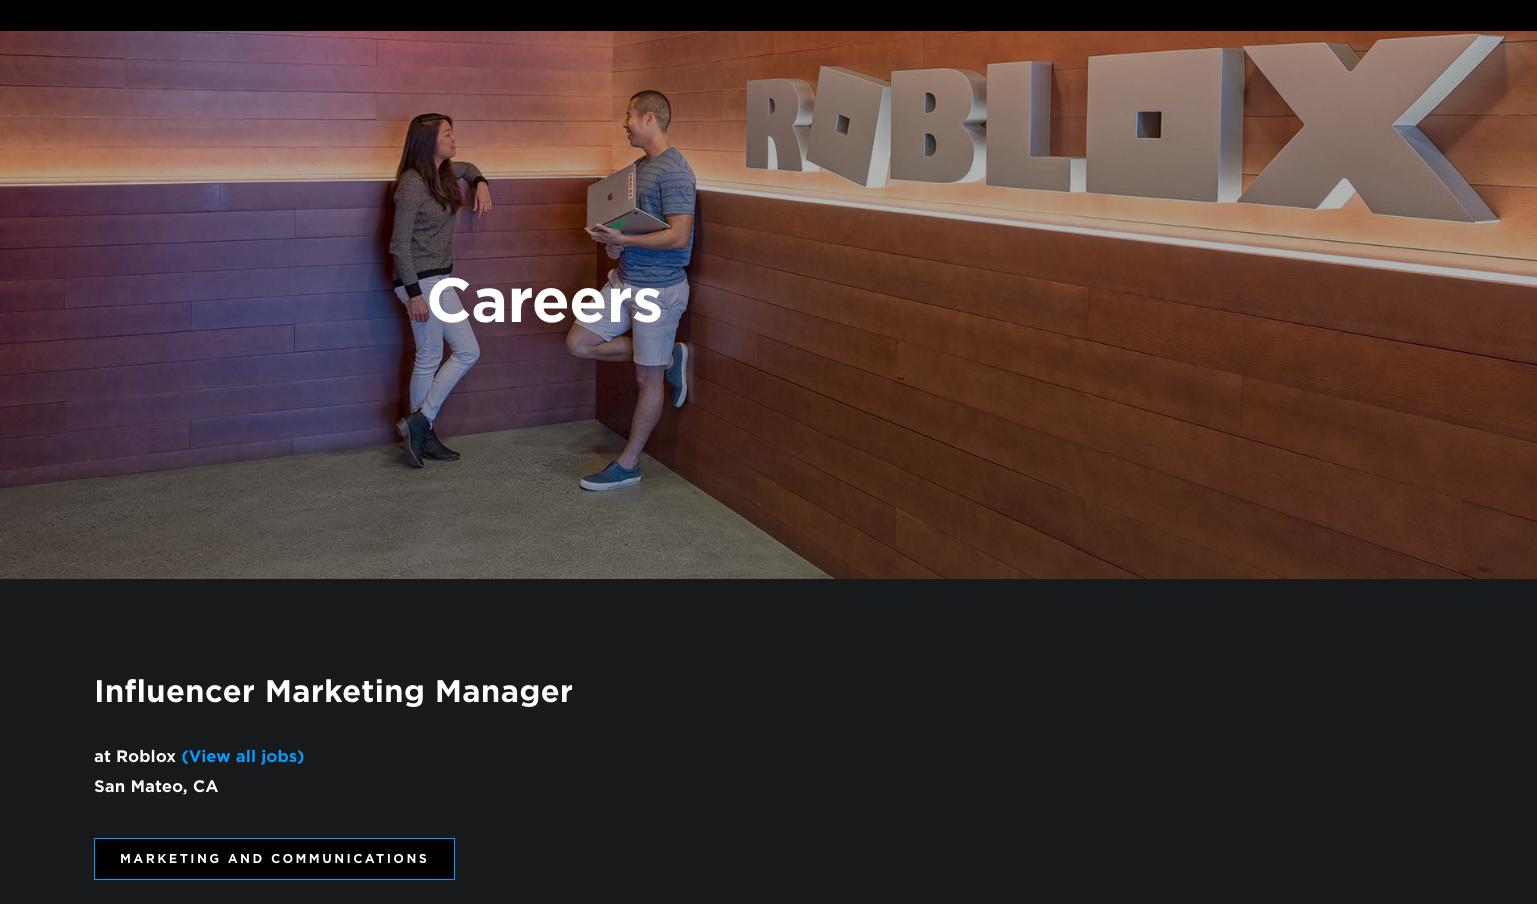 Rodrigo Velloso On Twitter Roblox Video Stars Is Growing And We Re Looking For An Up And Coming Partner Management And Success Professional To Join The Team As Our New Influencer Marketing Manager - careers roblox